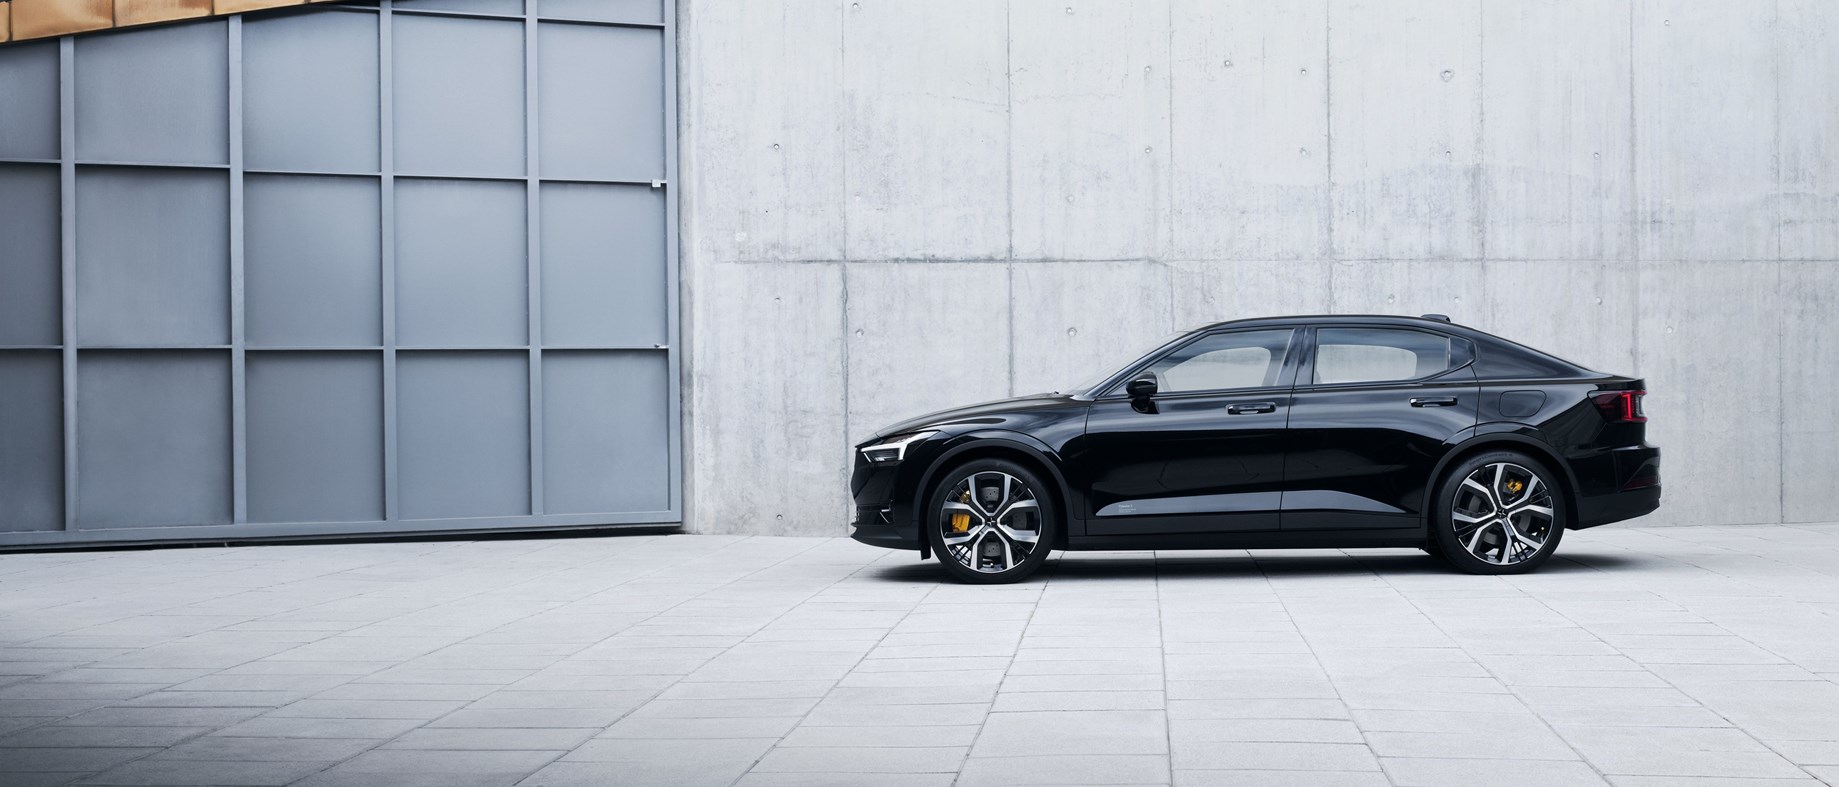 Polestar reports strong start to 2022 with record sales, continued growth and market expansion